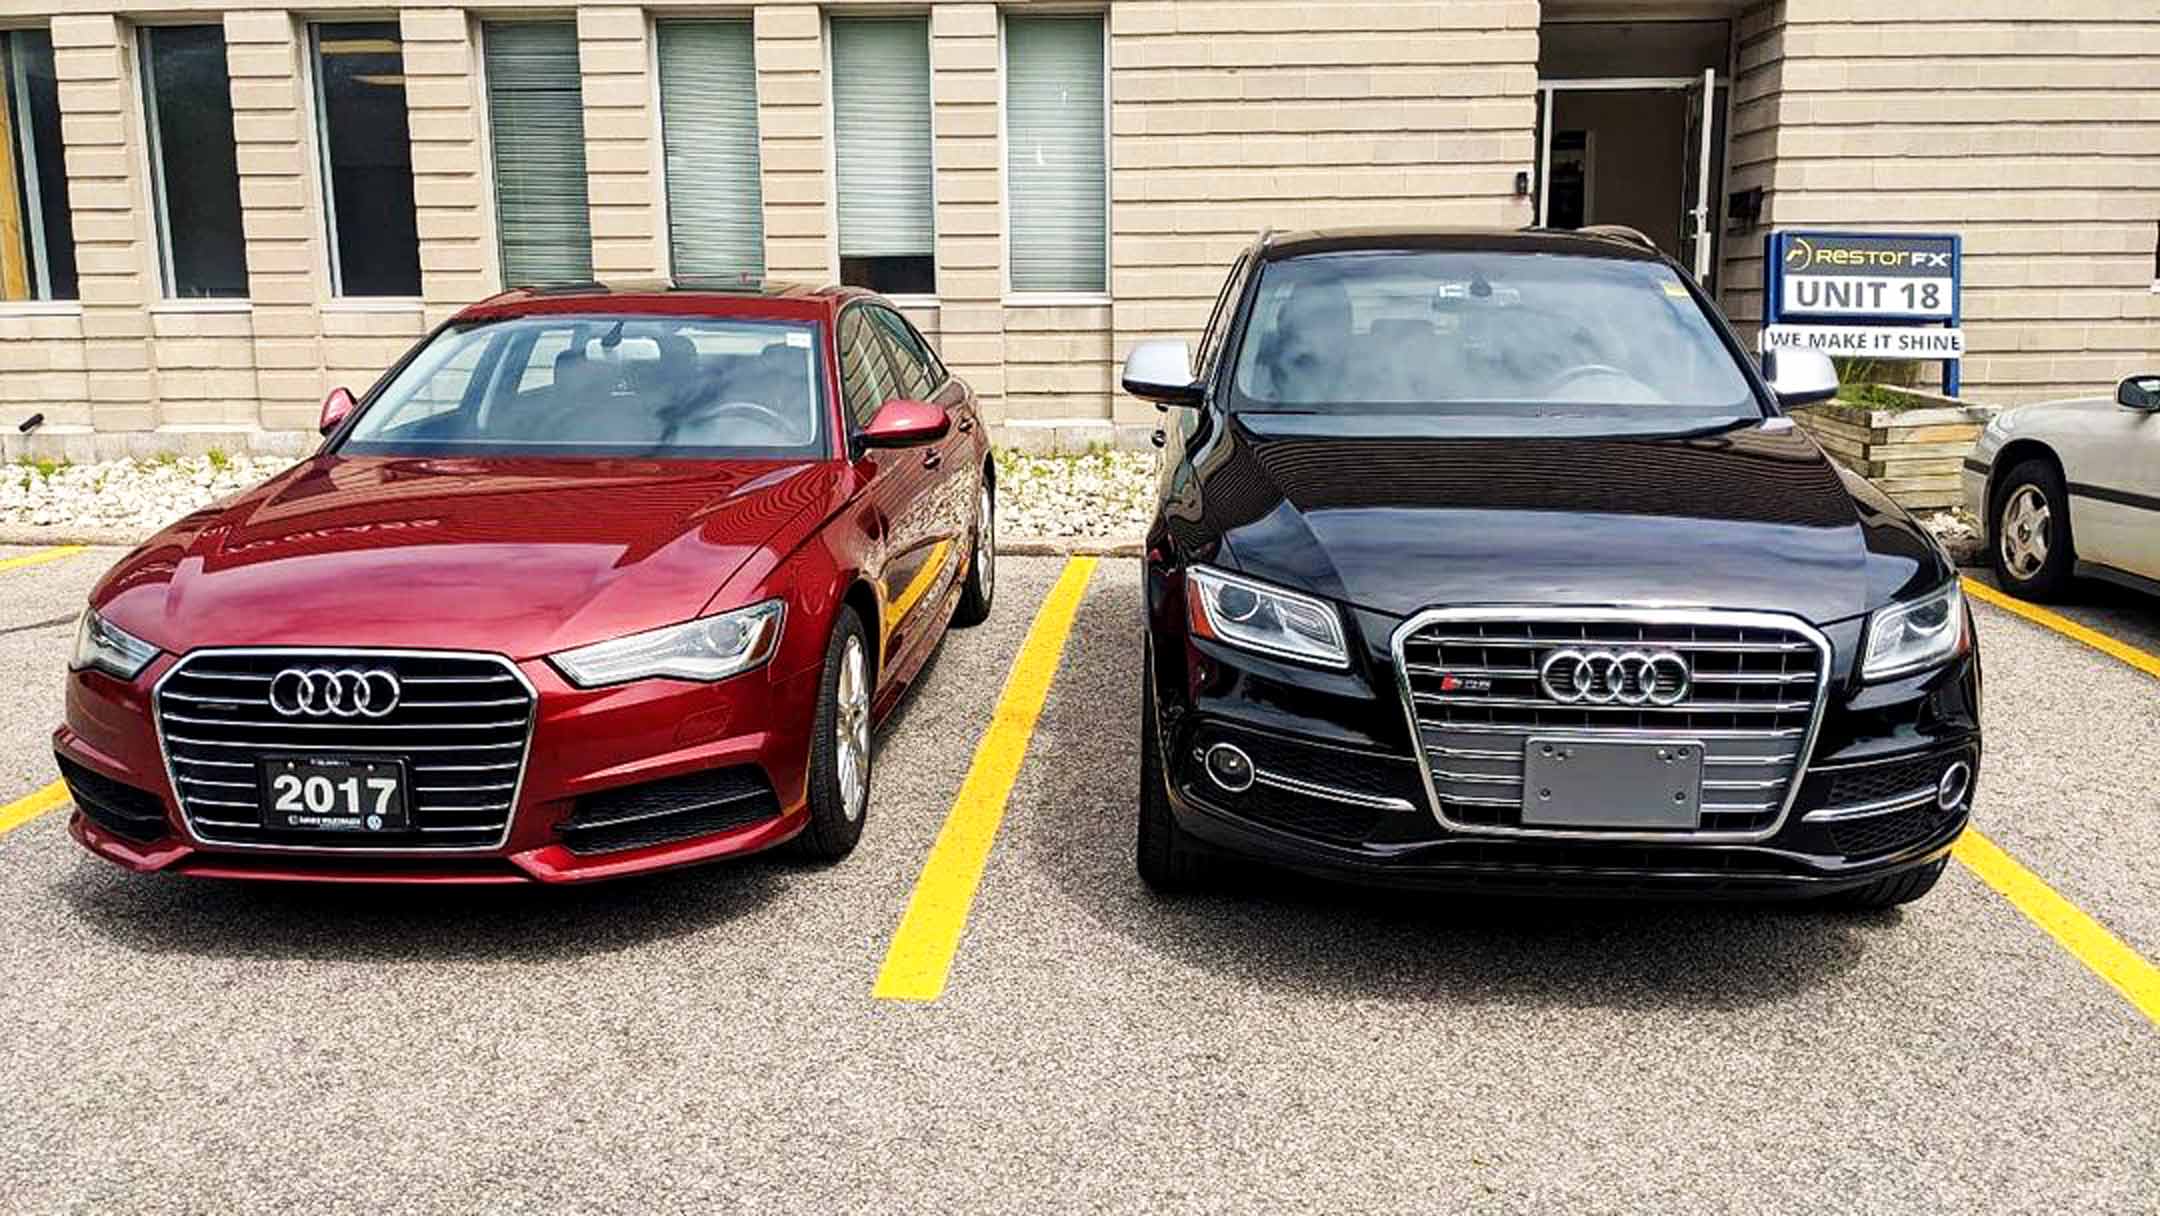 Beautifully restored red Audi sedan and black Audi SUV parked in front of RestorFX Barrie